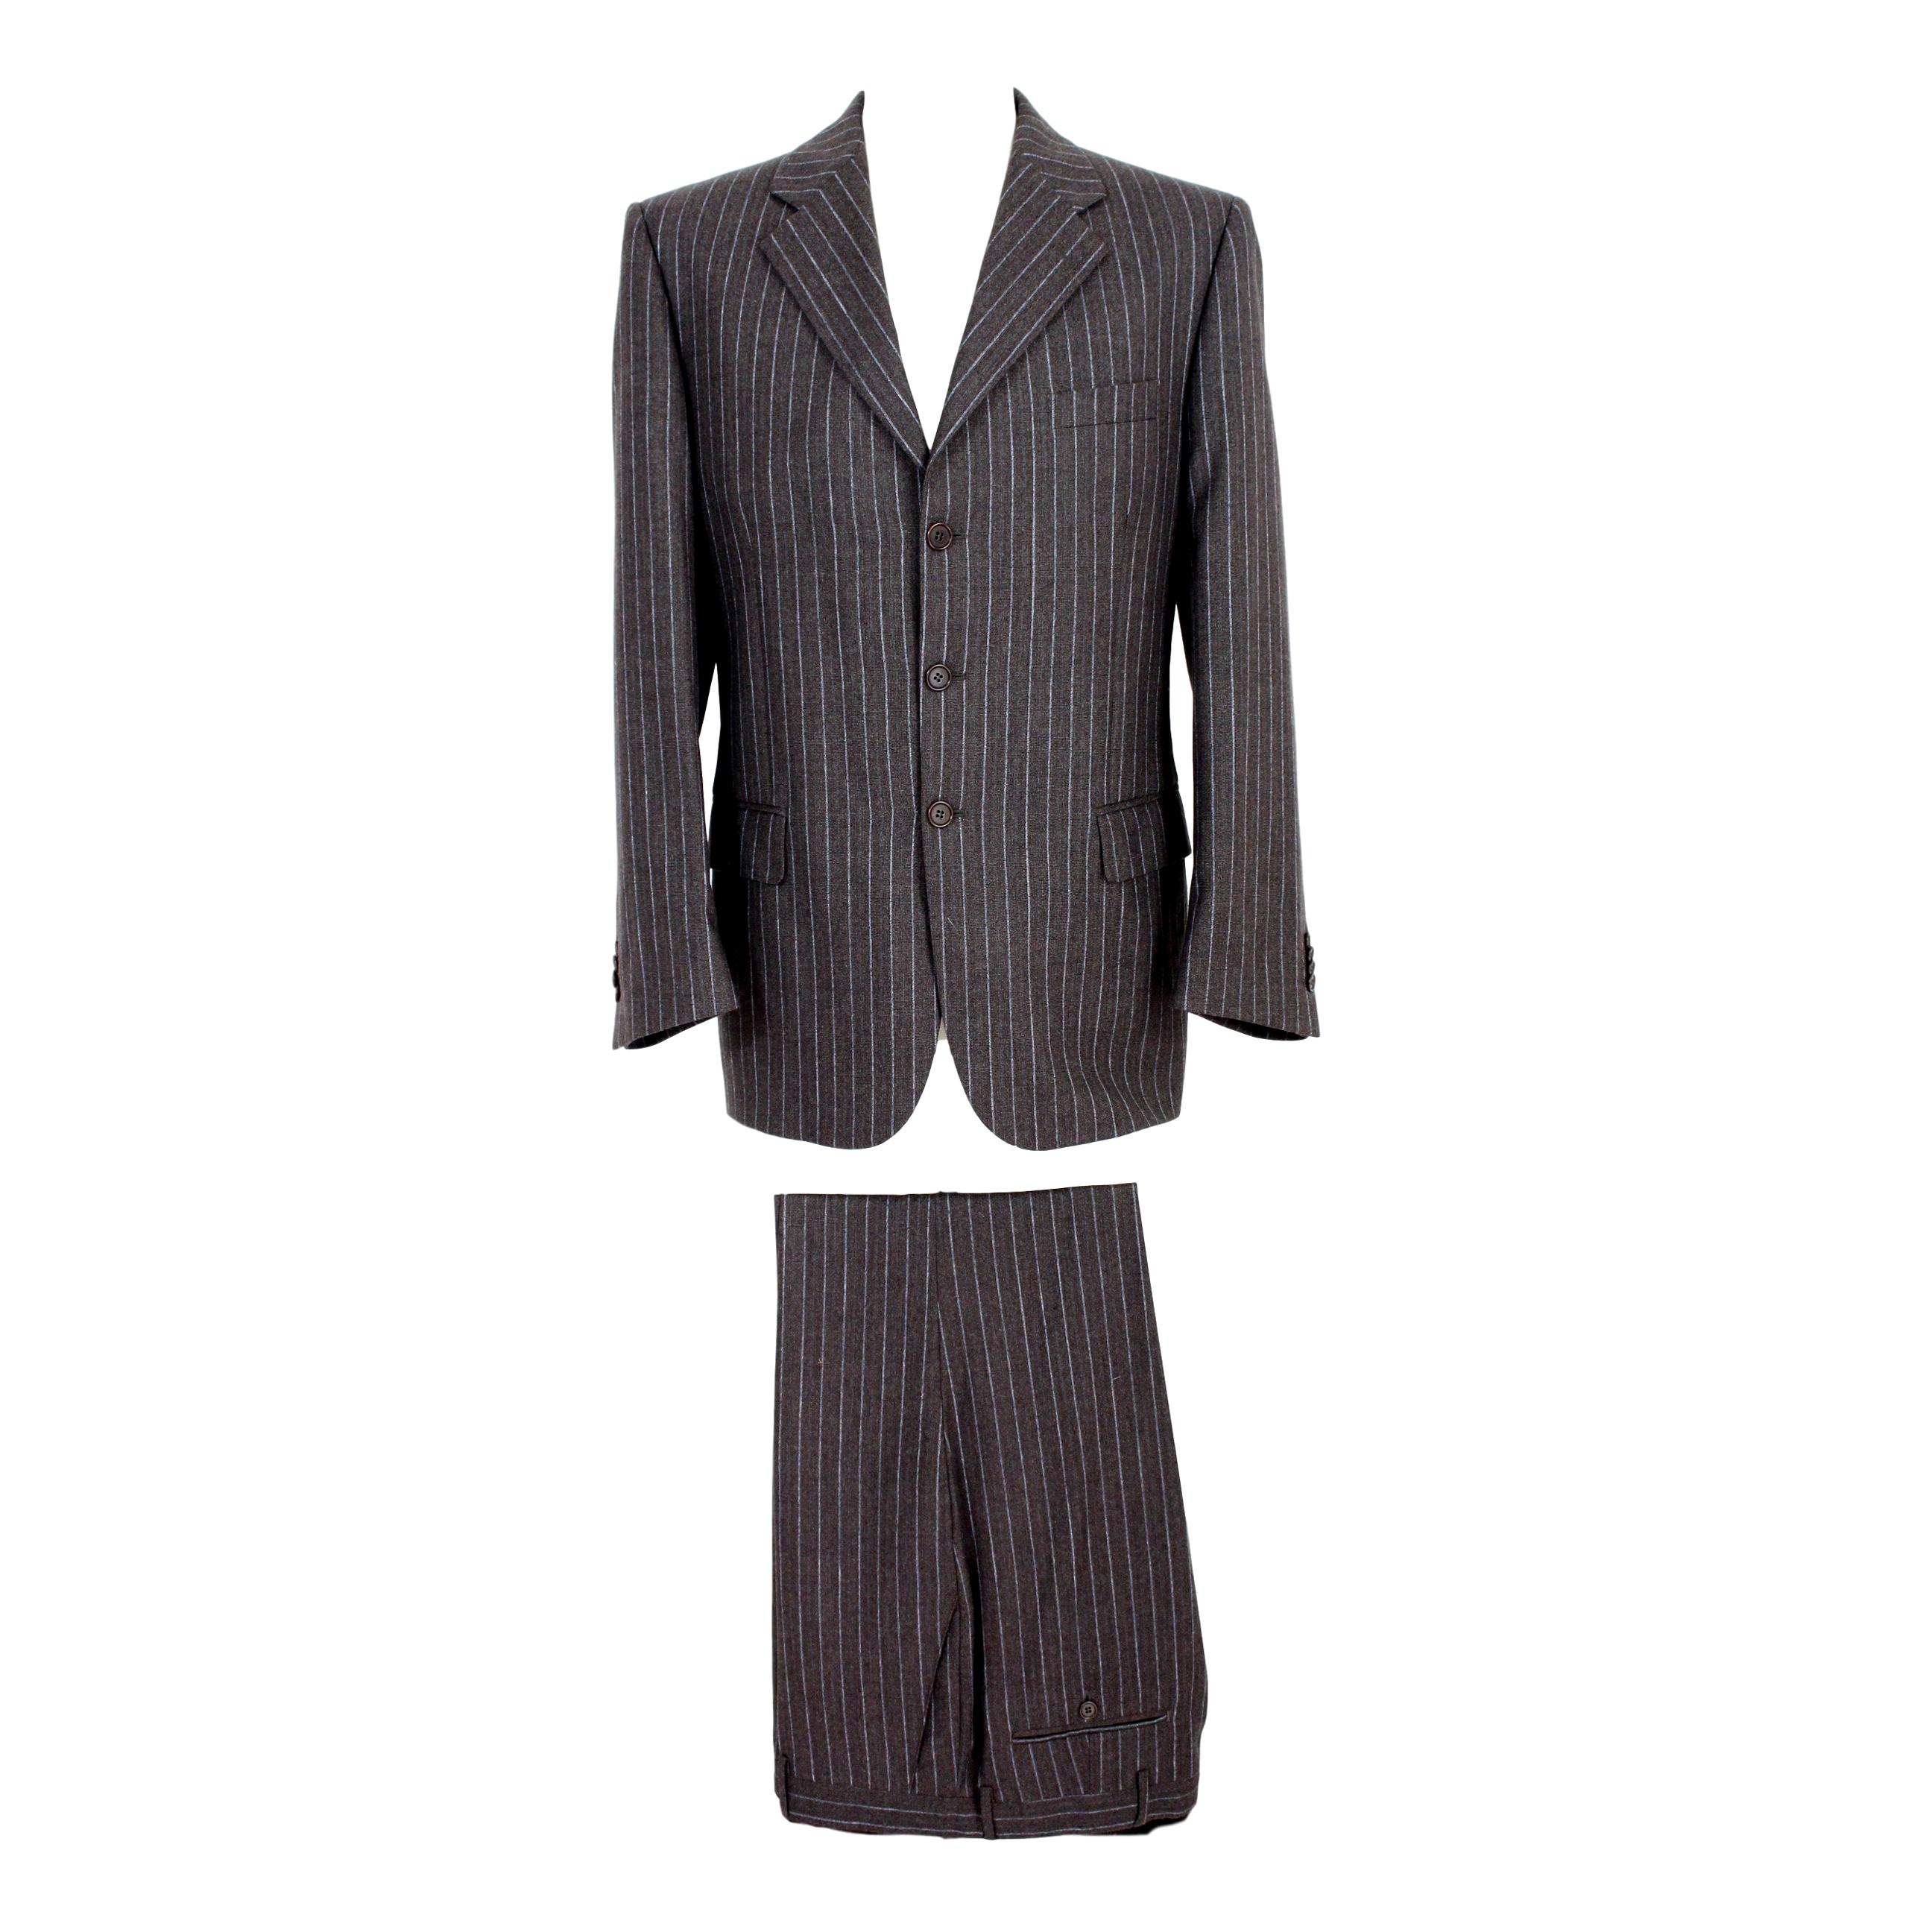 Roberto Capucci Brown Pinstriped Men's Suit 1990s Classic